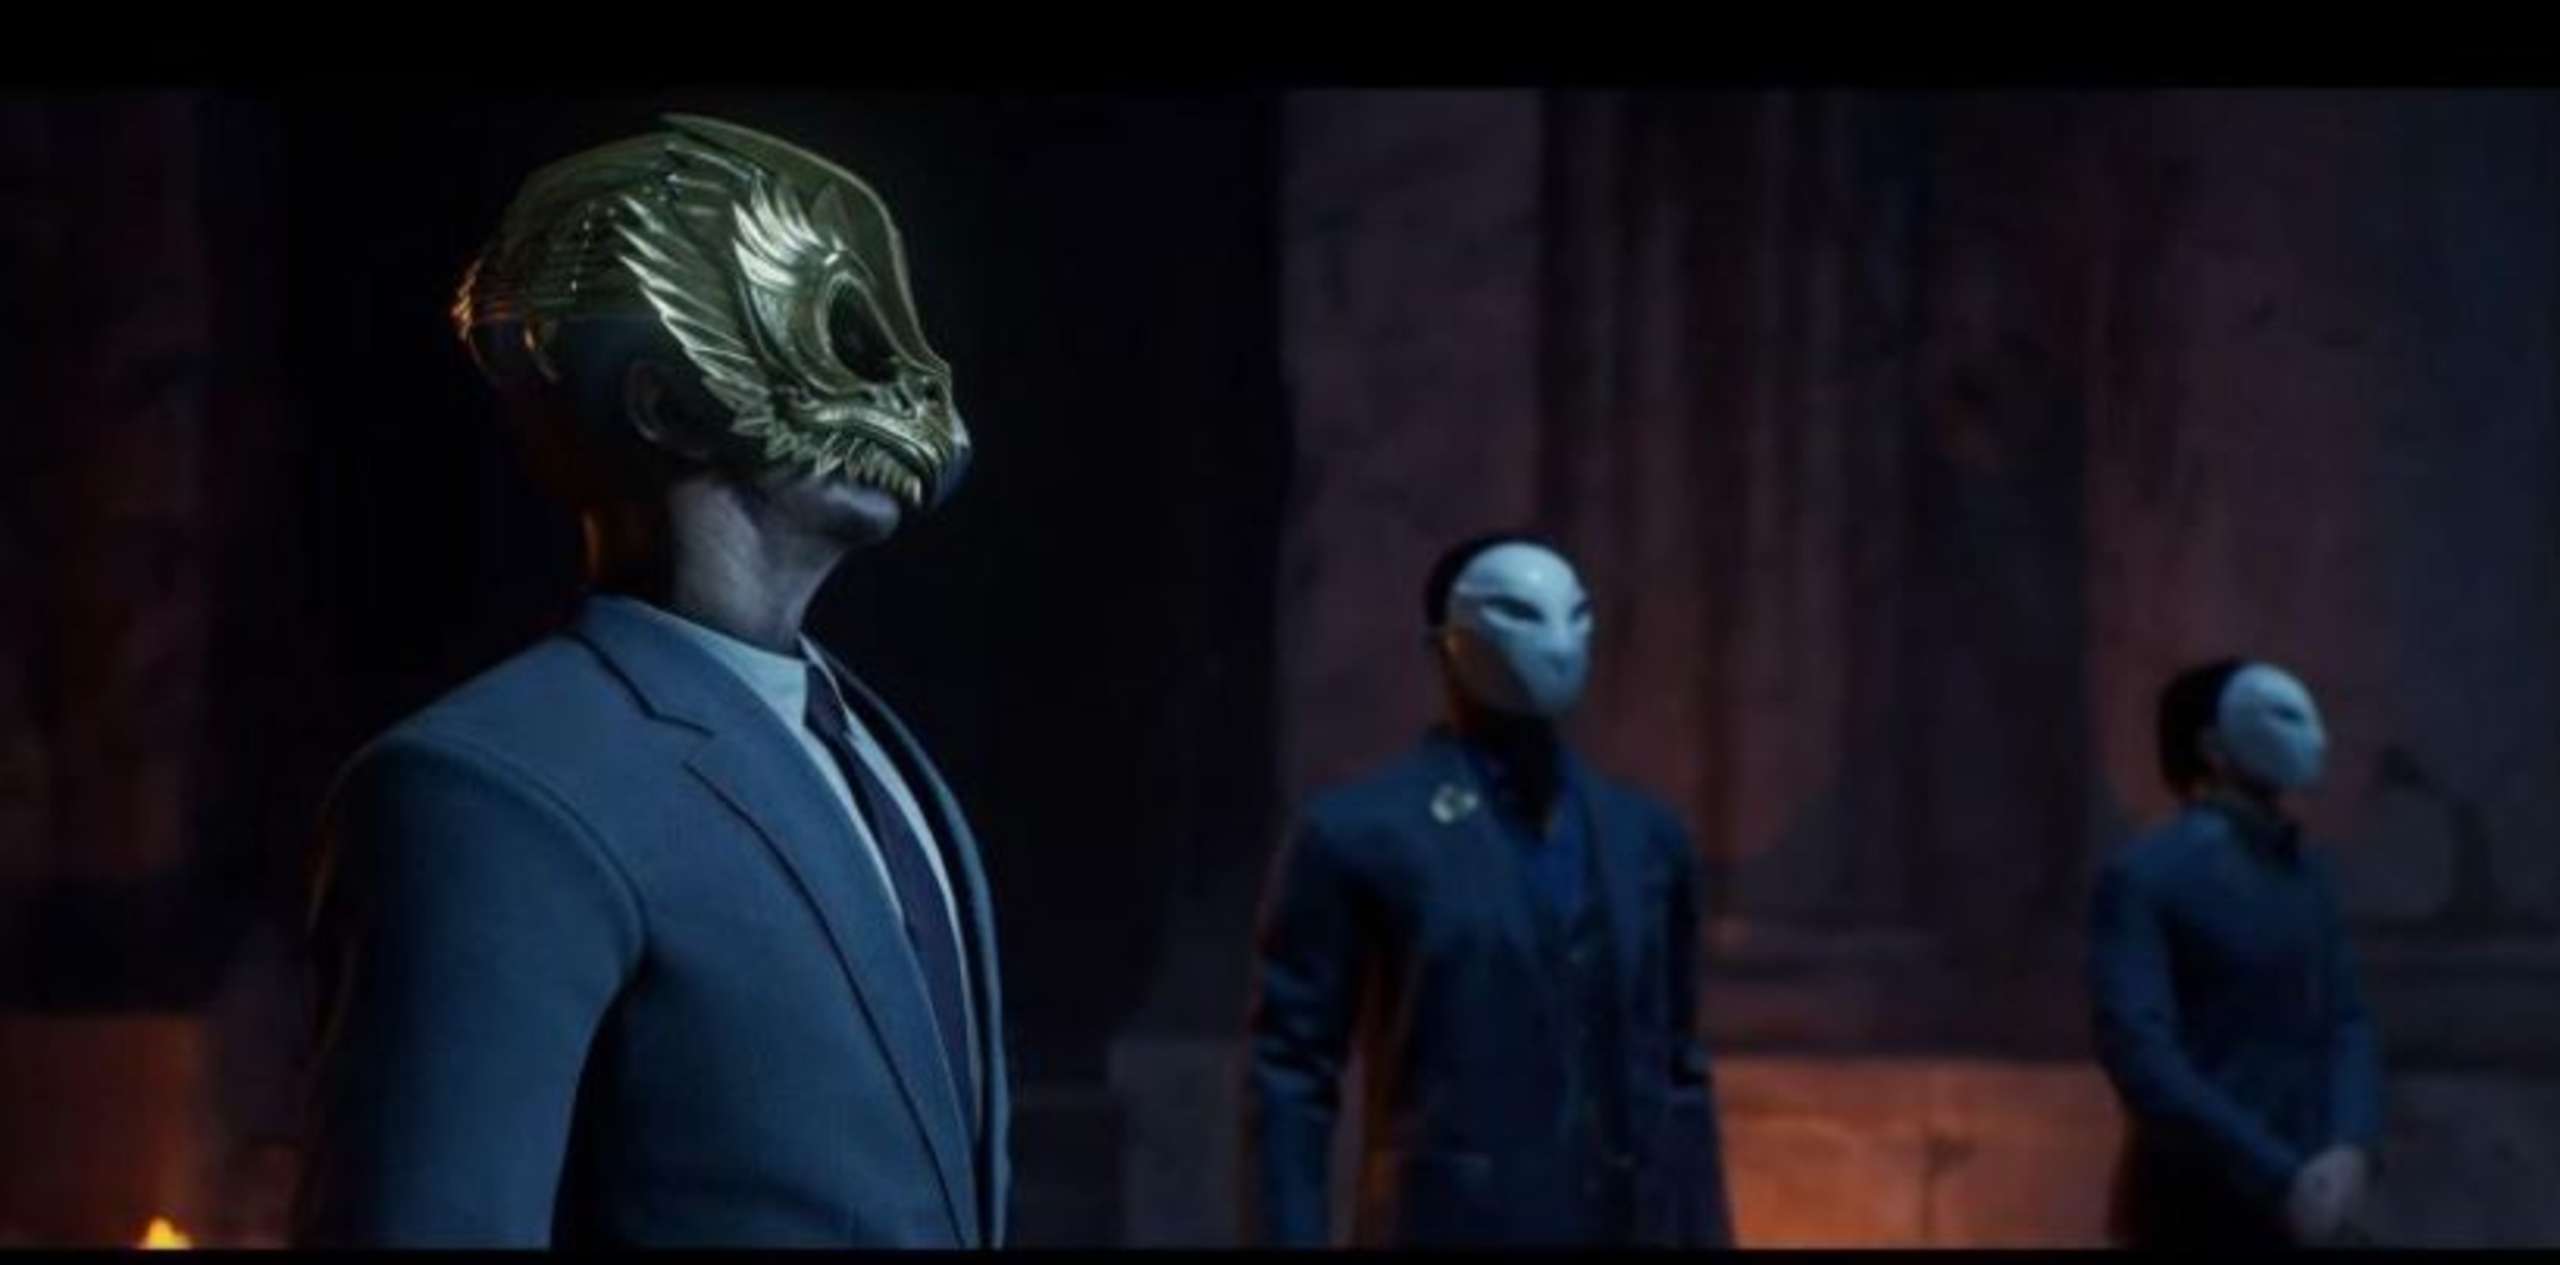 A Brand New Promotional Image For Gotham Knights Has Been Released, And It Focuses On The Court Of Owls, A Shadowy Organisation That Exercises Control Over Gotham City